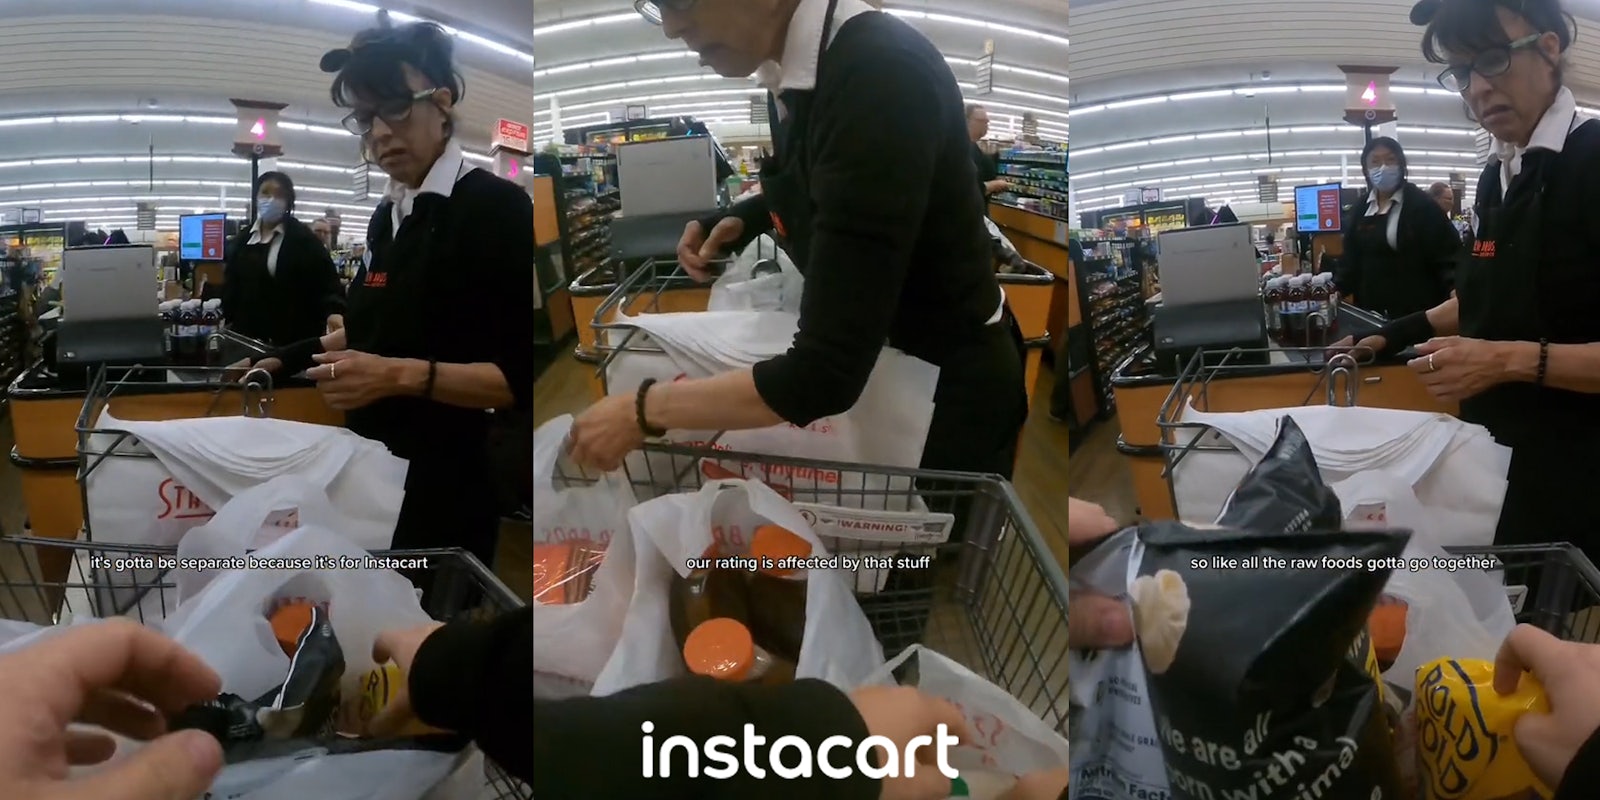 cashier with bags speaking at checkout with caption 'it's gotta be separate because it's for instacart' (l) cashier with bags speaking at checkout with caption 'our rating is affected by that stuff' with Instacart logo at bottom (c) cashier with bags speaking at checkout with caption 'so like all the raw foods gotta go together' (r)